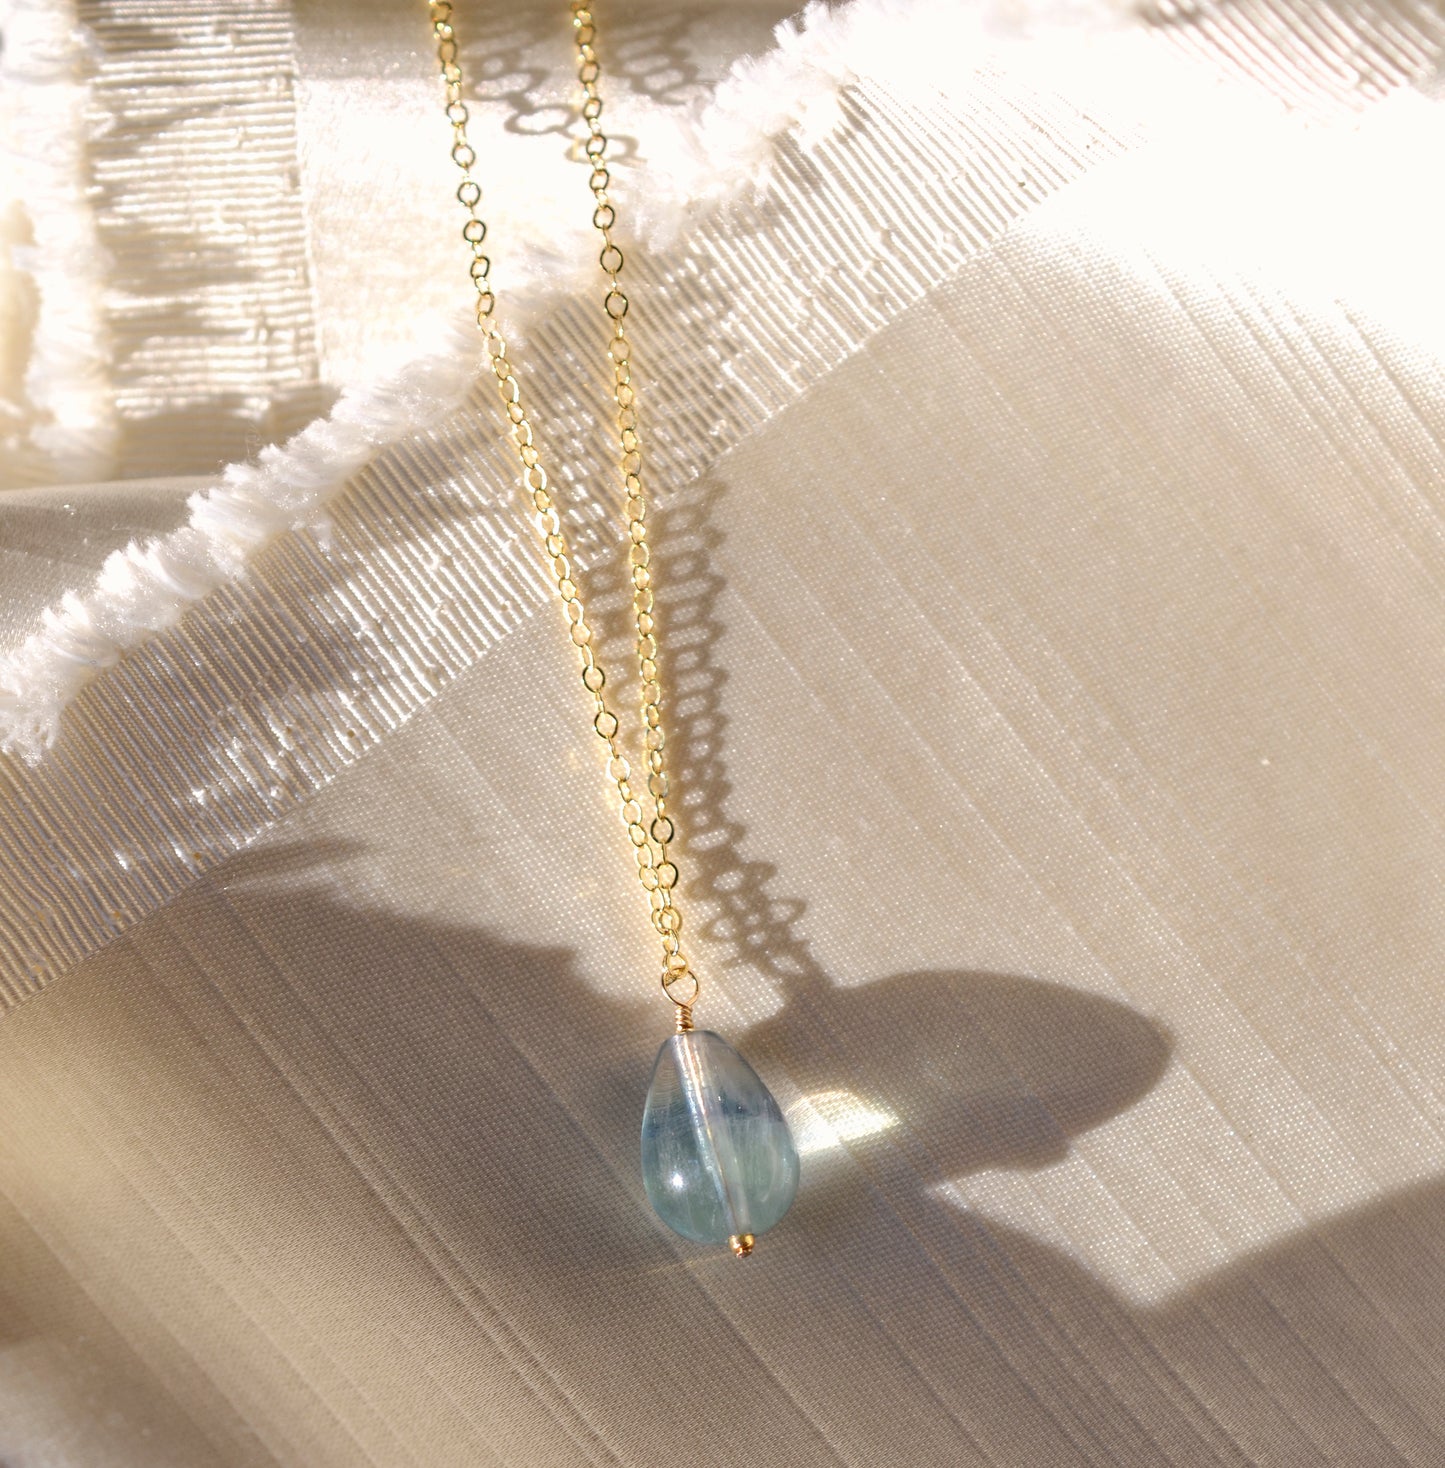 Natural Fluorite Necklace, Sterling Silver or 14k Gold Filled Chain